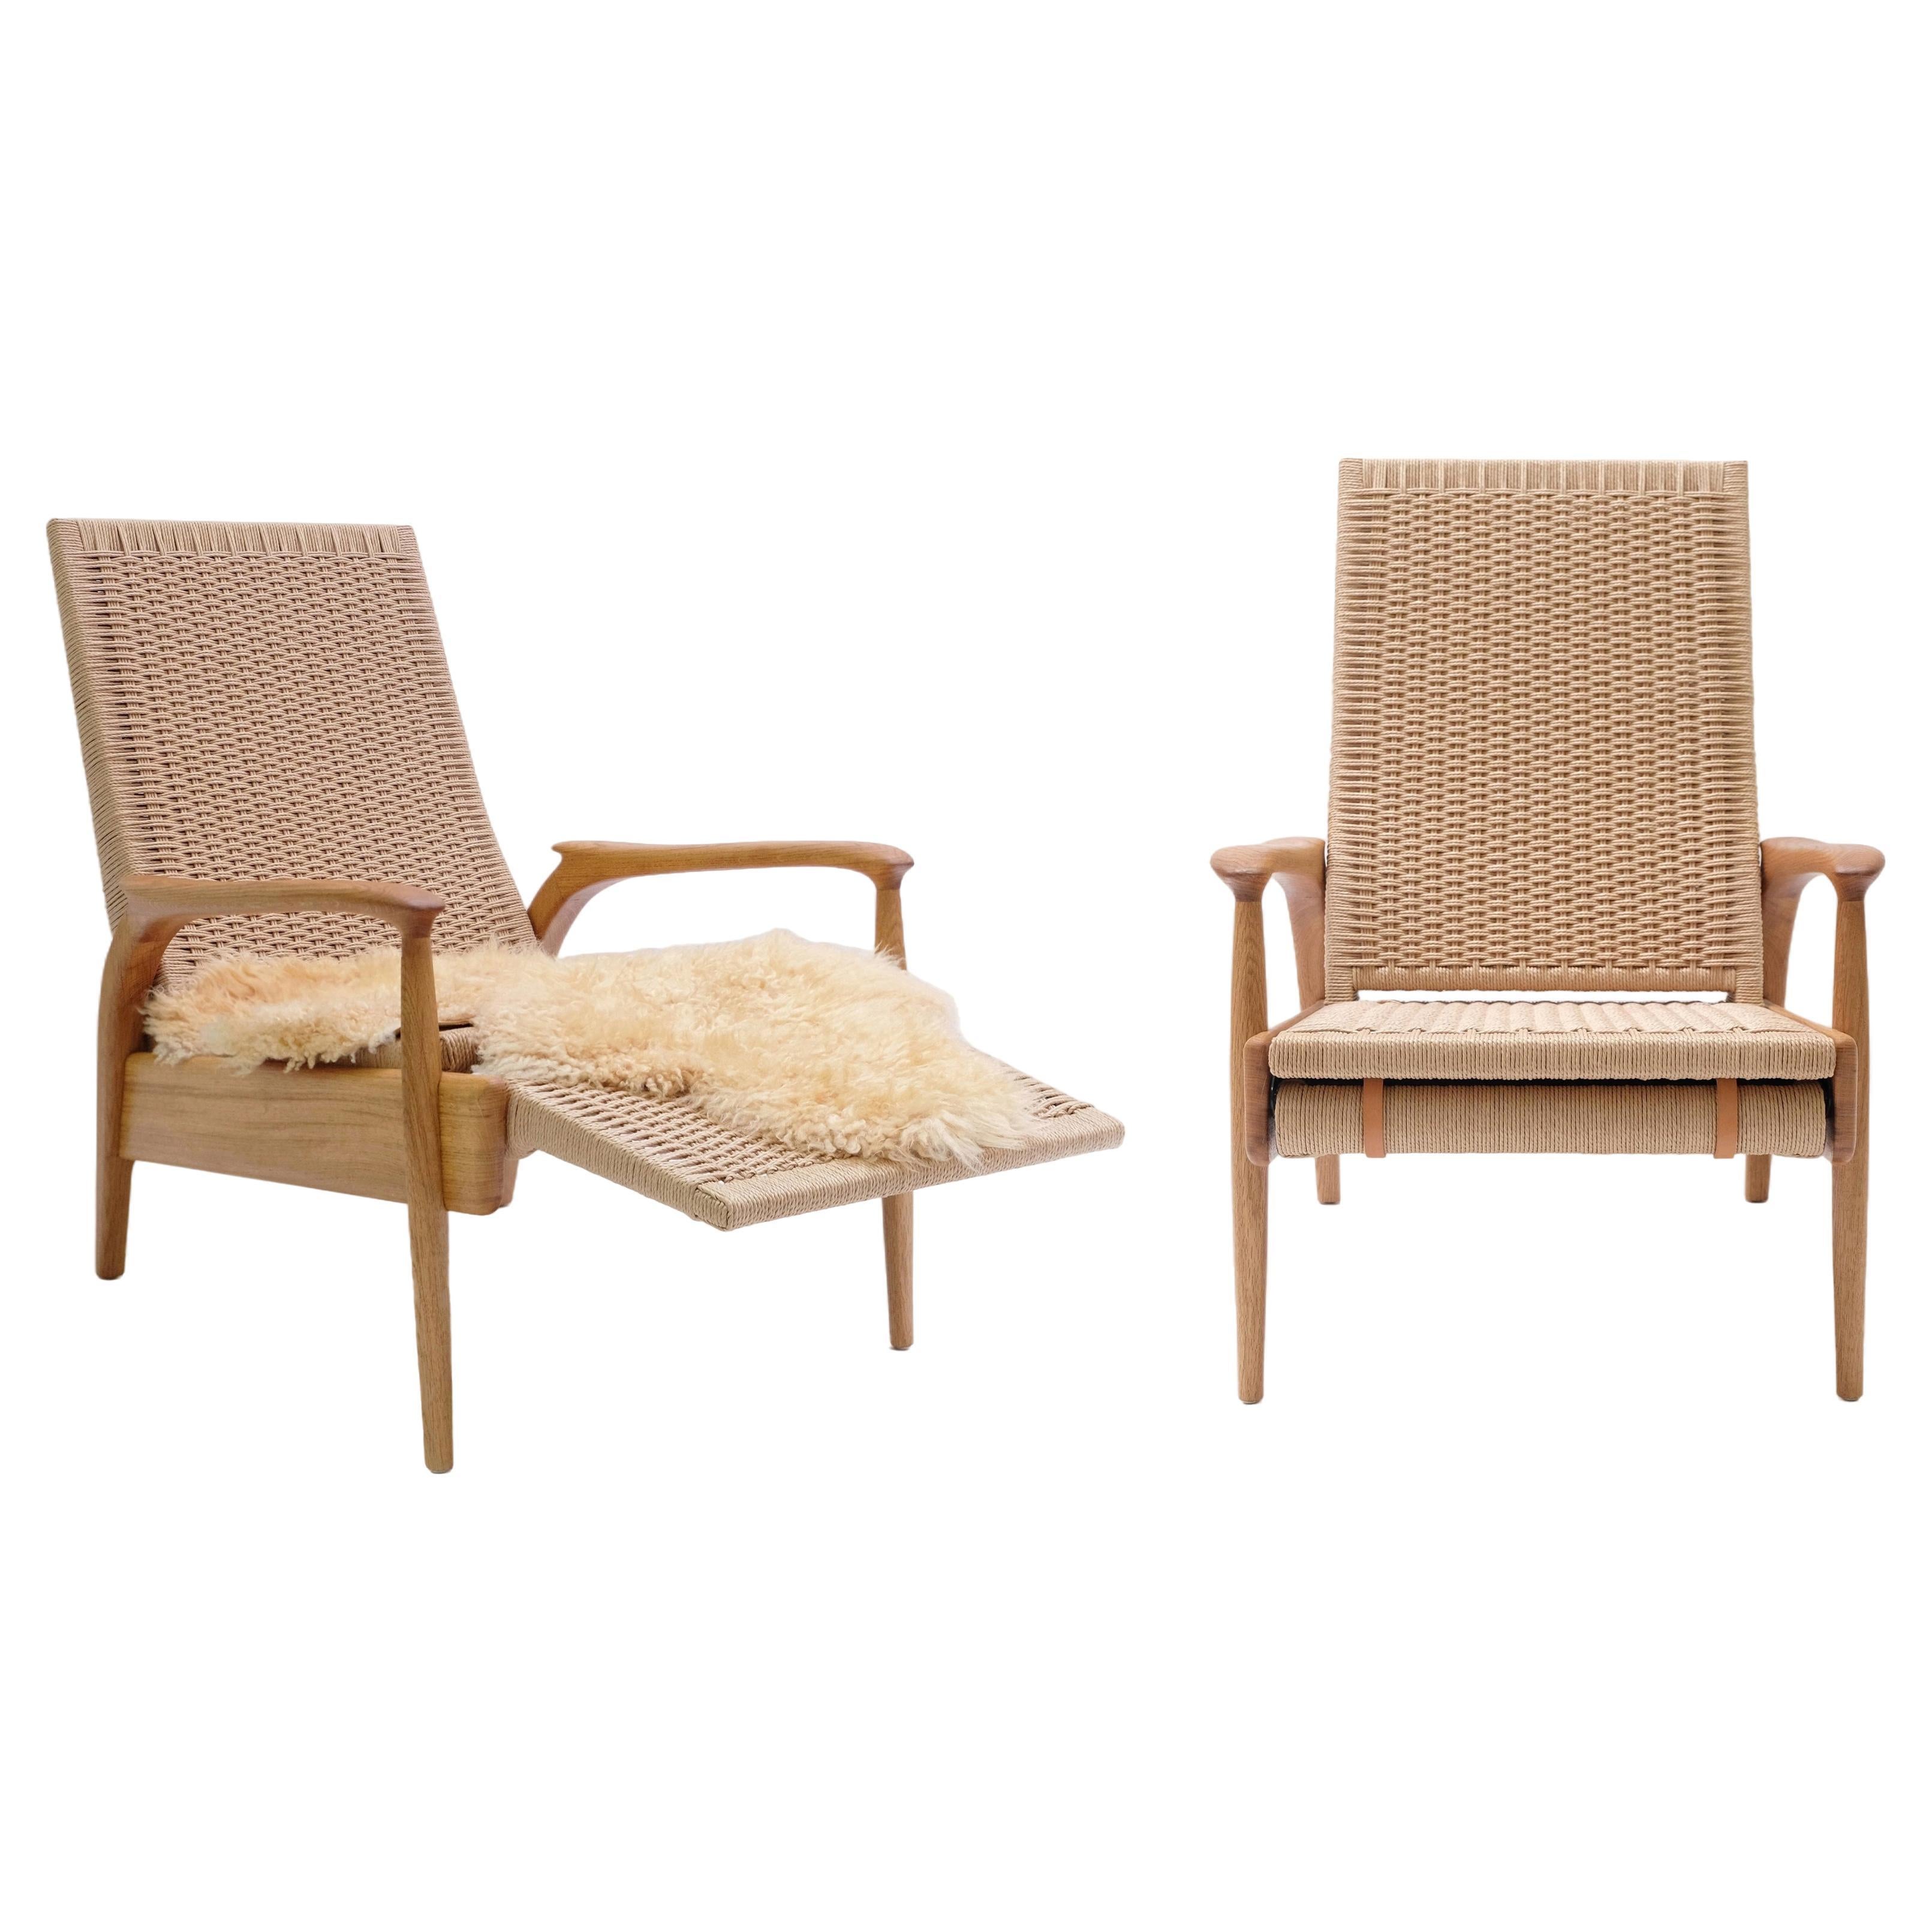 Pair of Custom-Made Lounge Chairs in Oiled Oak and Handwoven Natural Danish Cord